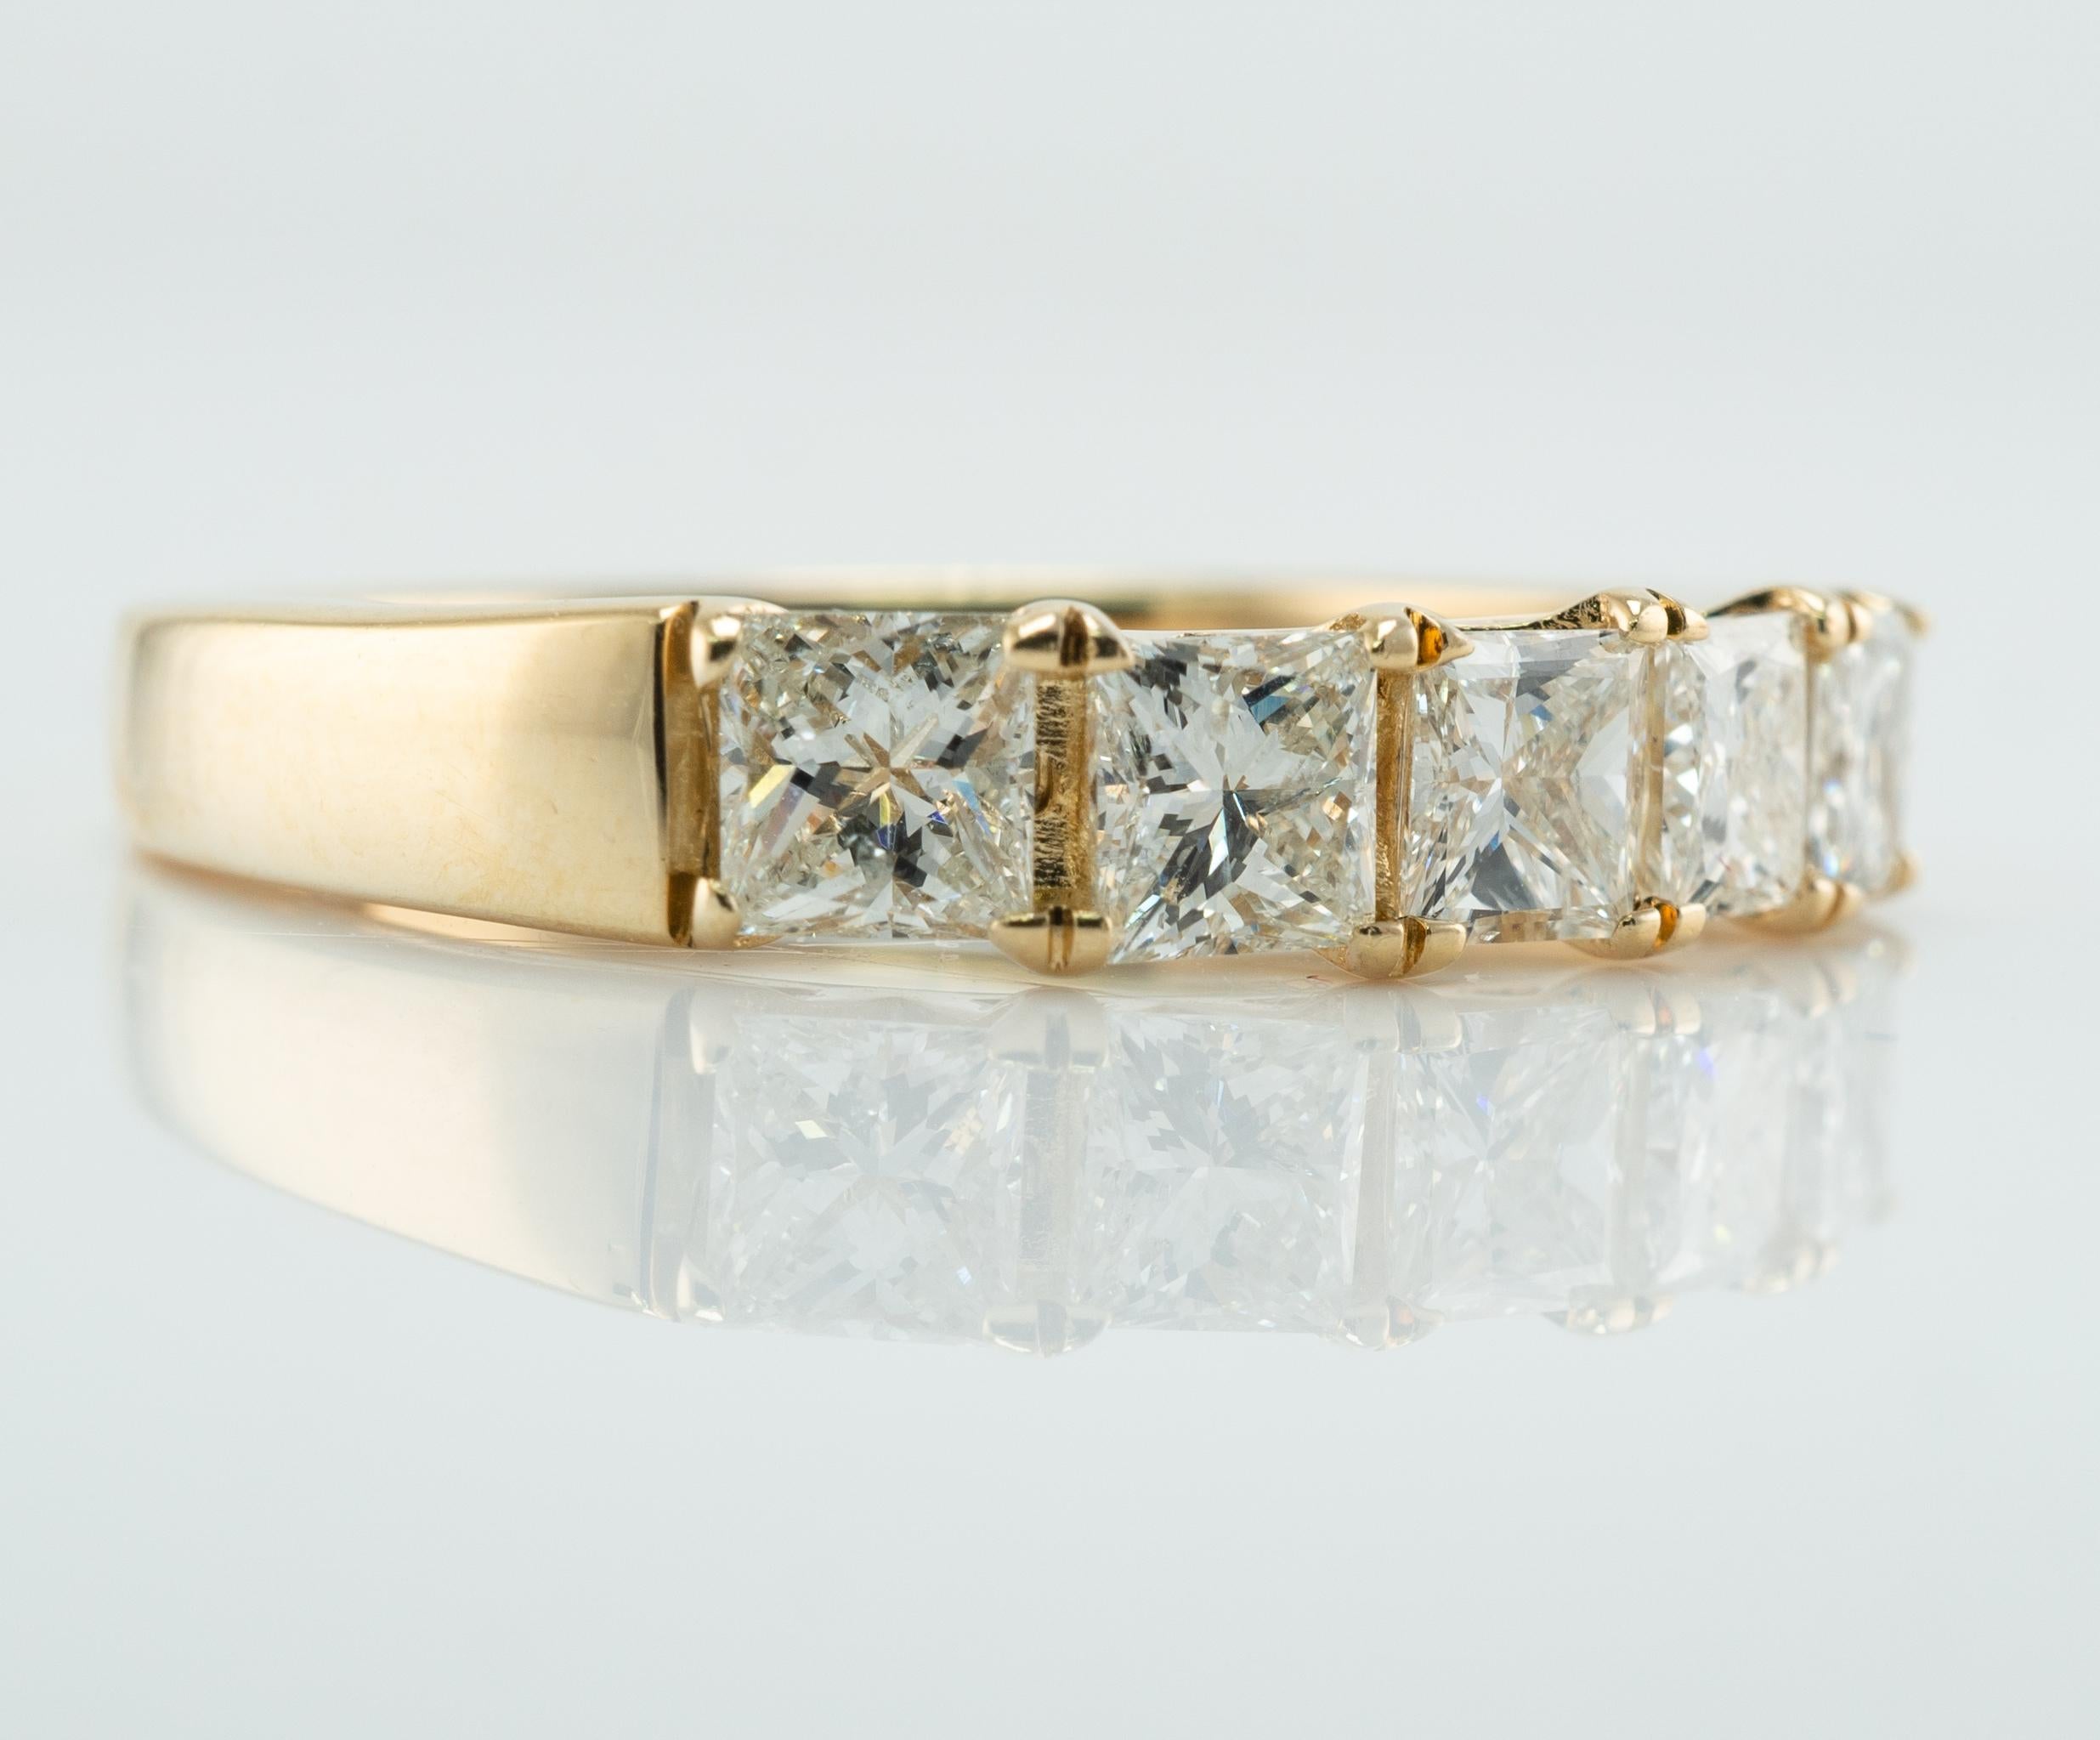 Natural Diamond Ring Princess cut 14K Gold Band 1.34 cttw

This estate ring is crafted in solid 14K Yellow Gold.
Five princess cut diamonds total 1.30 carats of VS2 clarity and G color.
One round diamond is set inside of the shank. This is a .04